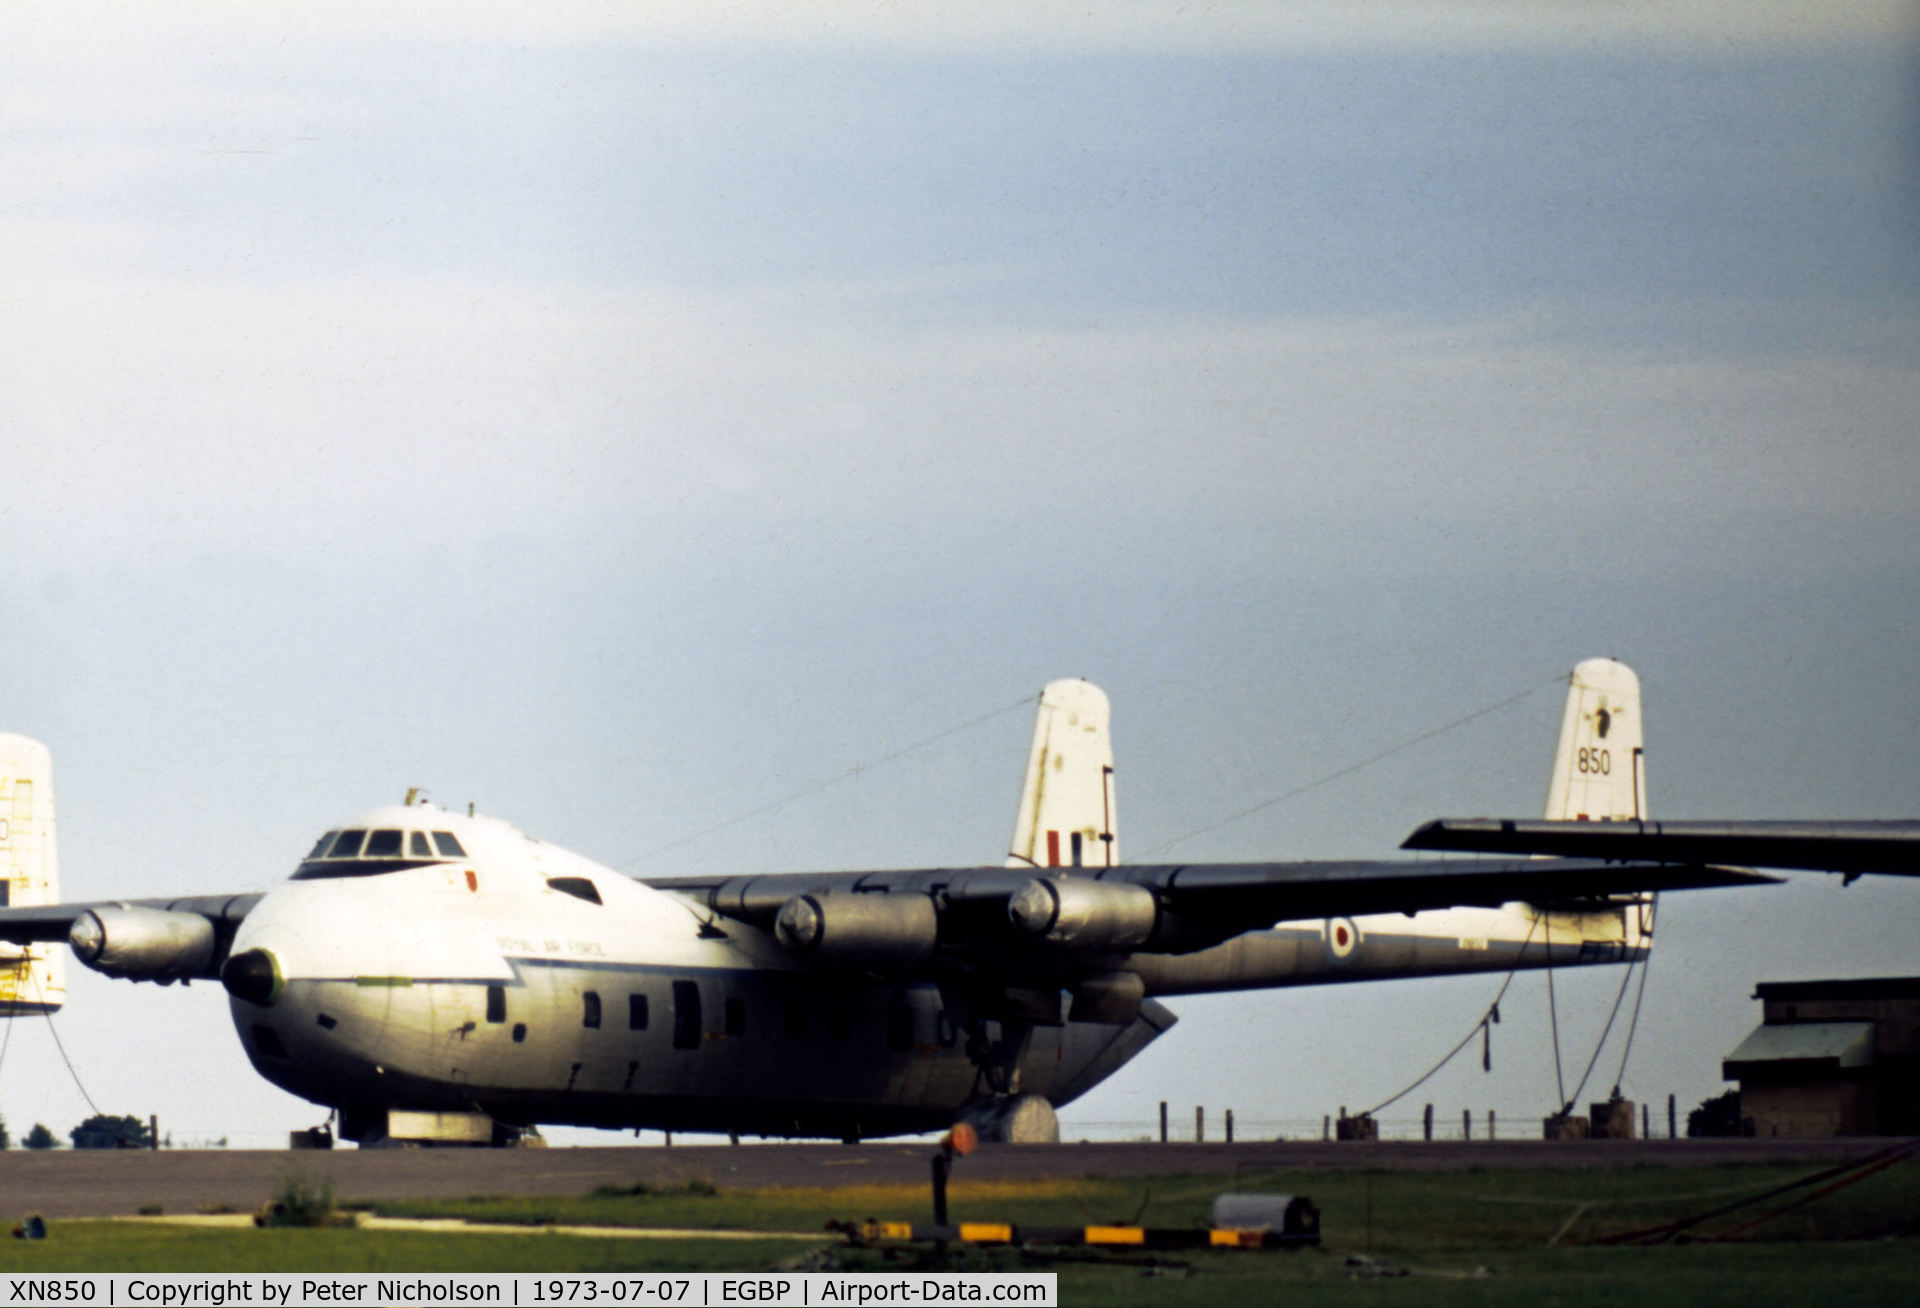 XN850, 1961 Armstrong Whitworth AW-660 Argosy C.1 C/N 6754, Argosy C.1 of 114 Squadron in storage at RAF Kemble in the Summer of 1973.